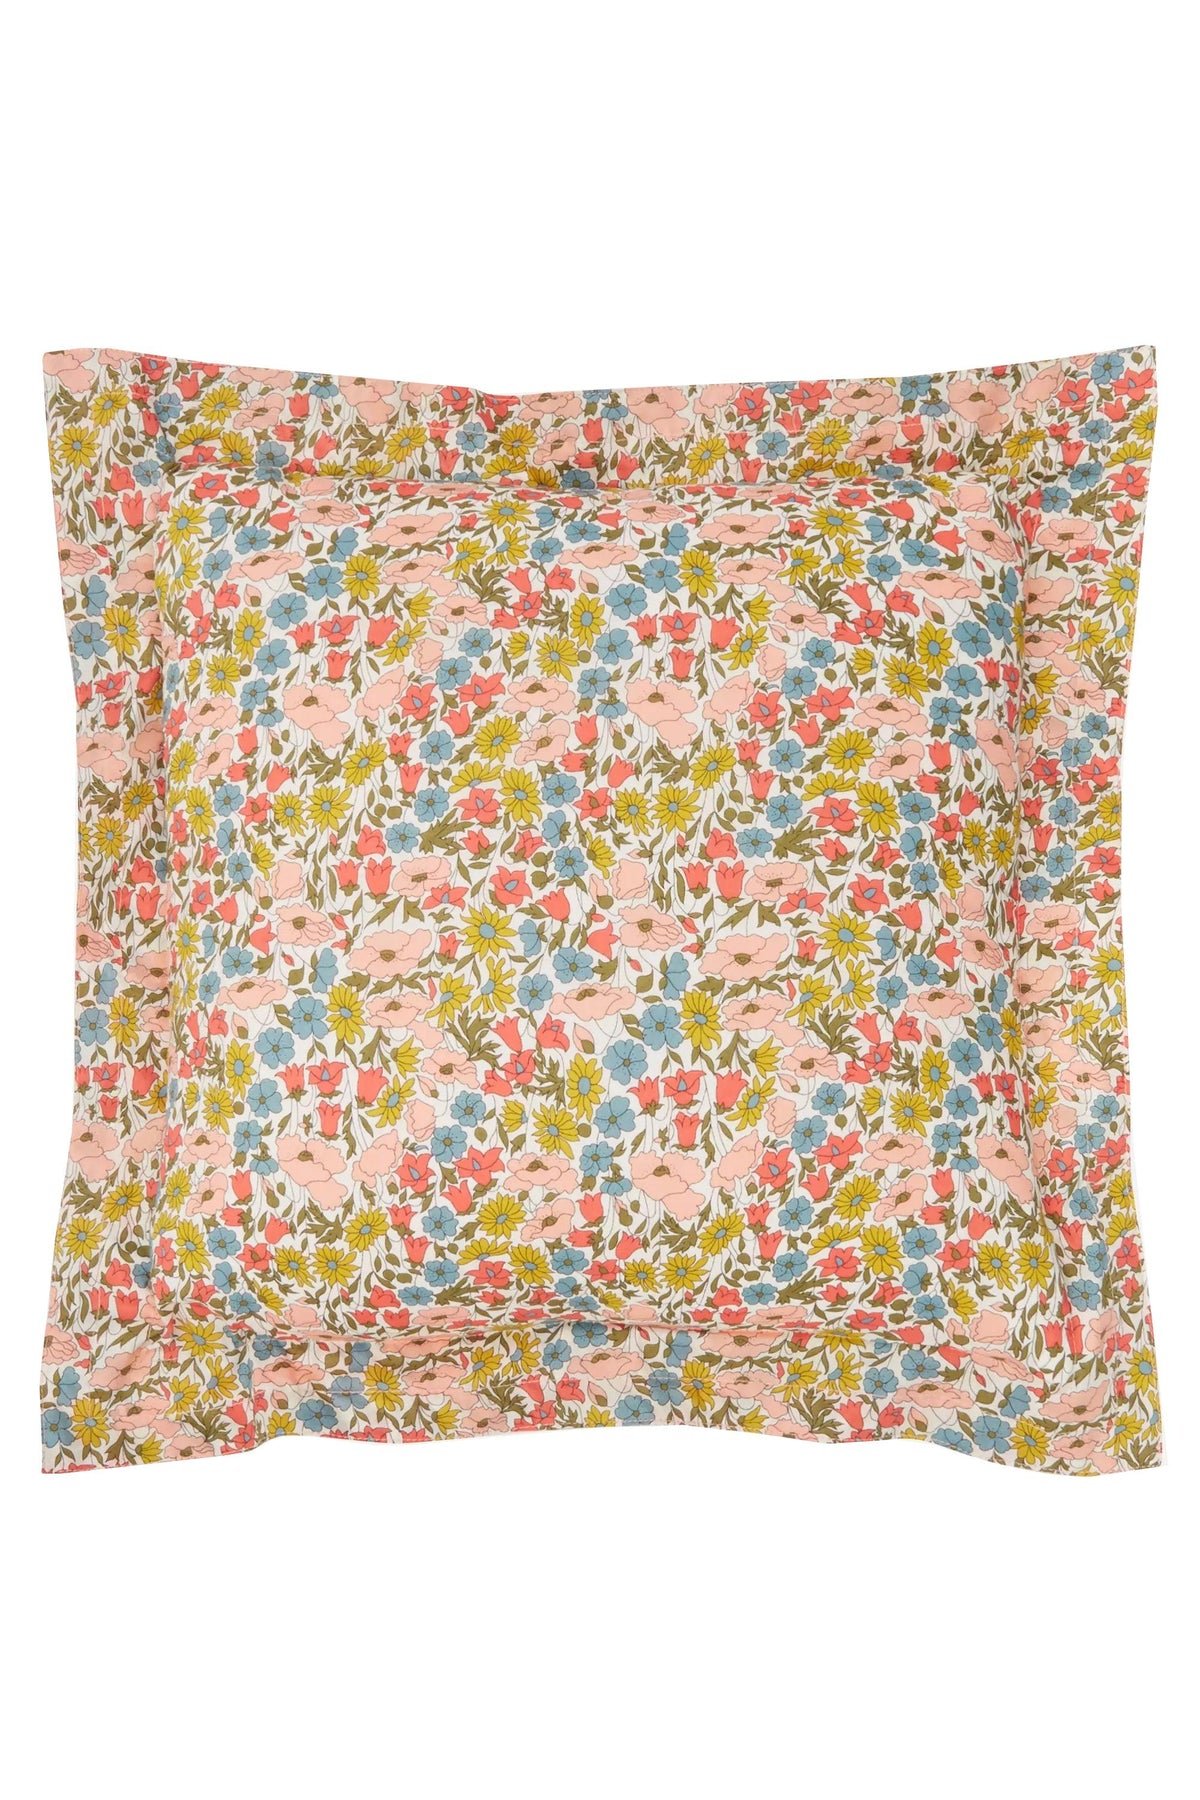 Topstitch Cushion made with Liberty Fabric POPPY & DAISY - Coco & Wolf